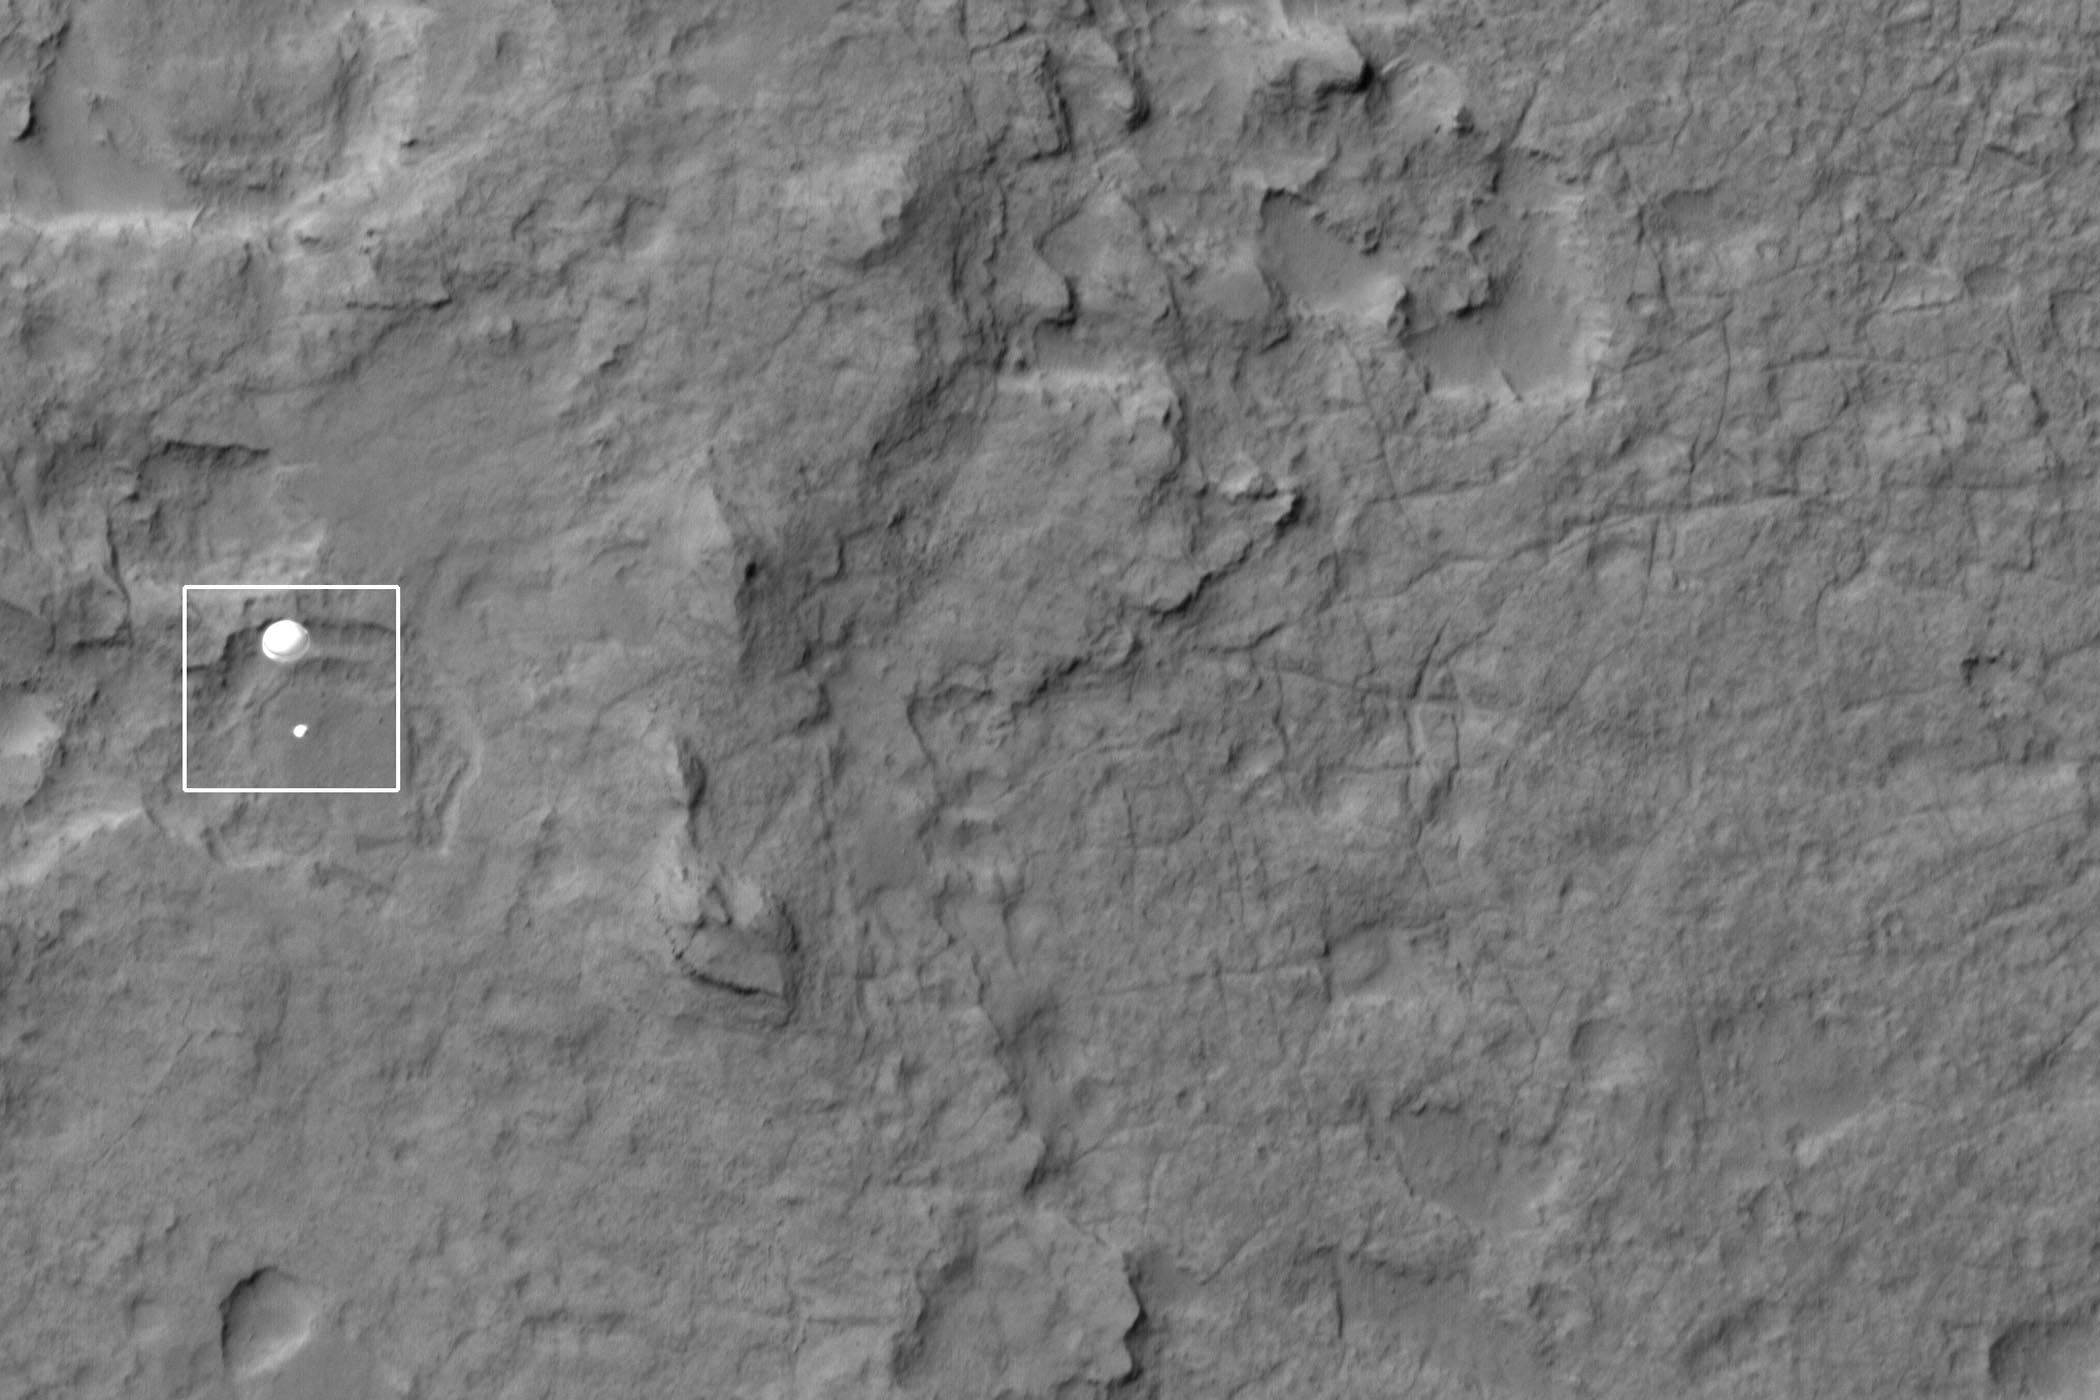 NASA's Curiosity rover and its parachute are seen by NASA's Mars Reconnaissance Orbiter as Curiosity descends to the surface around 10:32 p.m. PDT, Aug. 5, or 1:32 a.m. EDT, Aug. 6, 2012. The rover is equipped with a nuclear-powered lab capable of vaporizing rocks and ingesting soil, measuring habitability, and whether Mars ever had an environment able to support life.